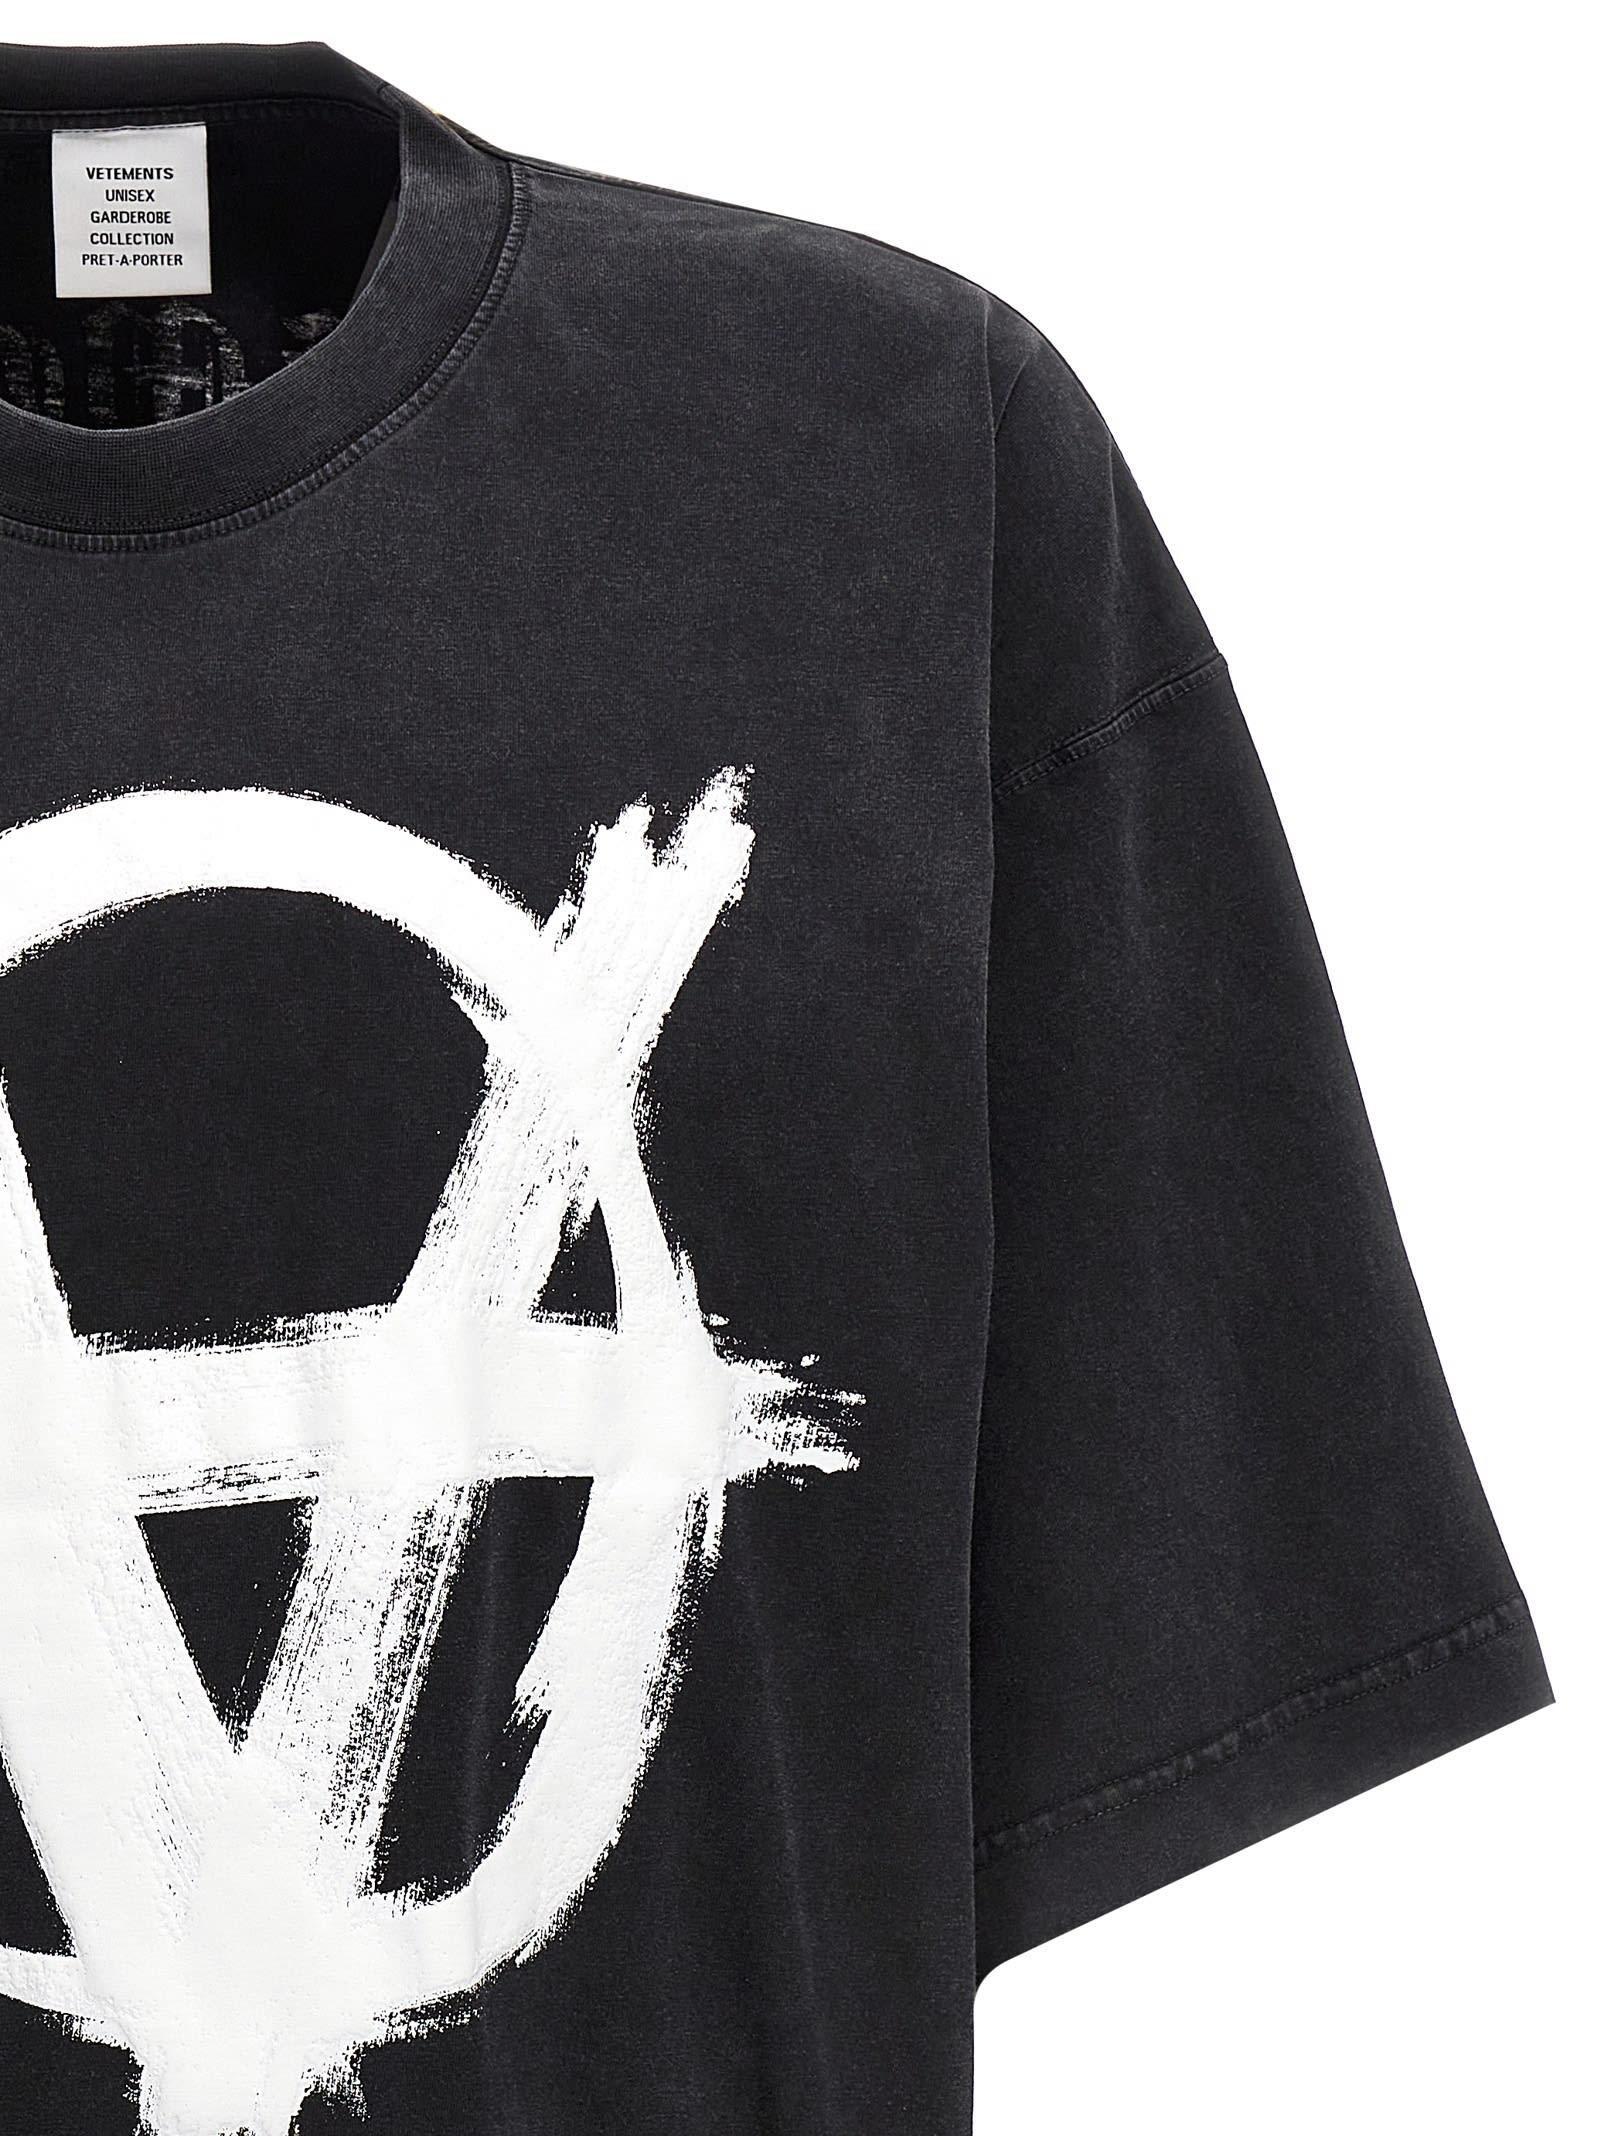 Vetements Reverse Anarchy T-shirt in Black for Men | Lyst